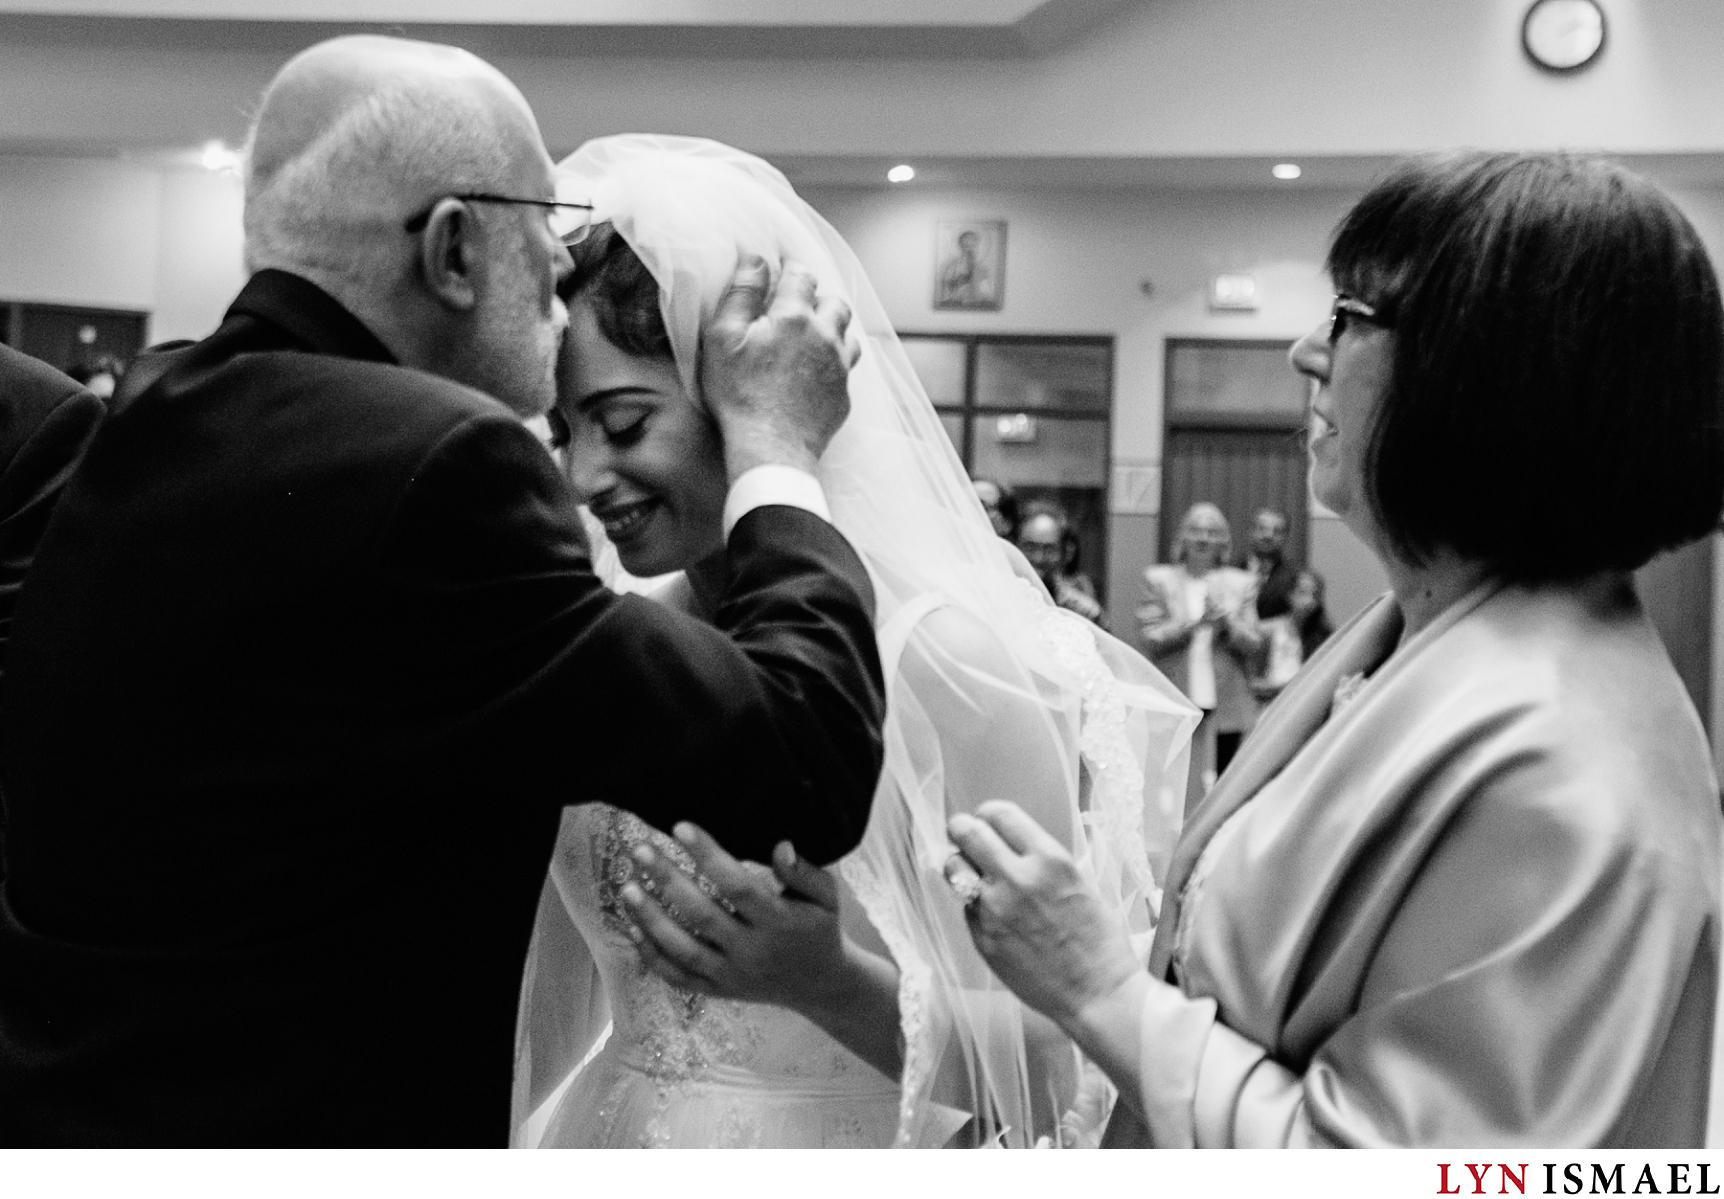 Father of the bride kisses the bride's forehead as he gave her away.